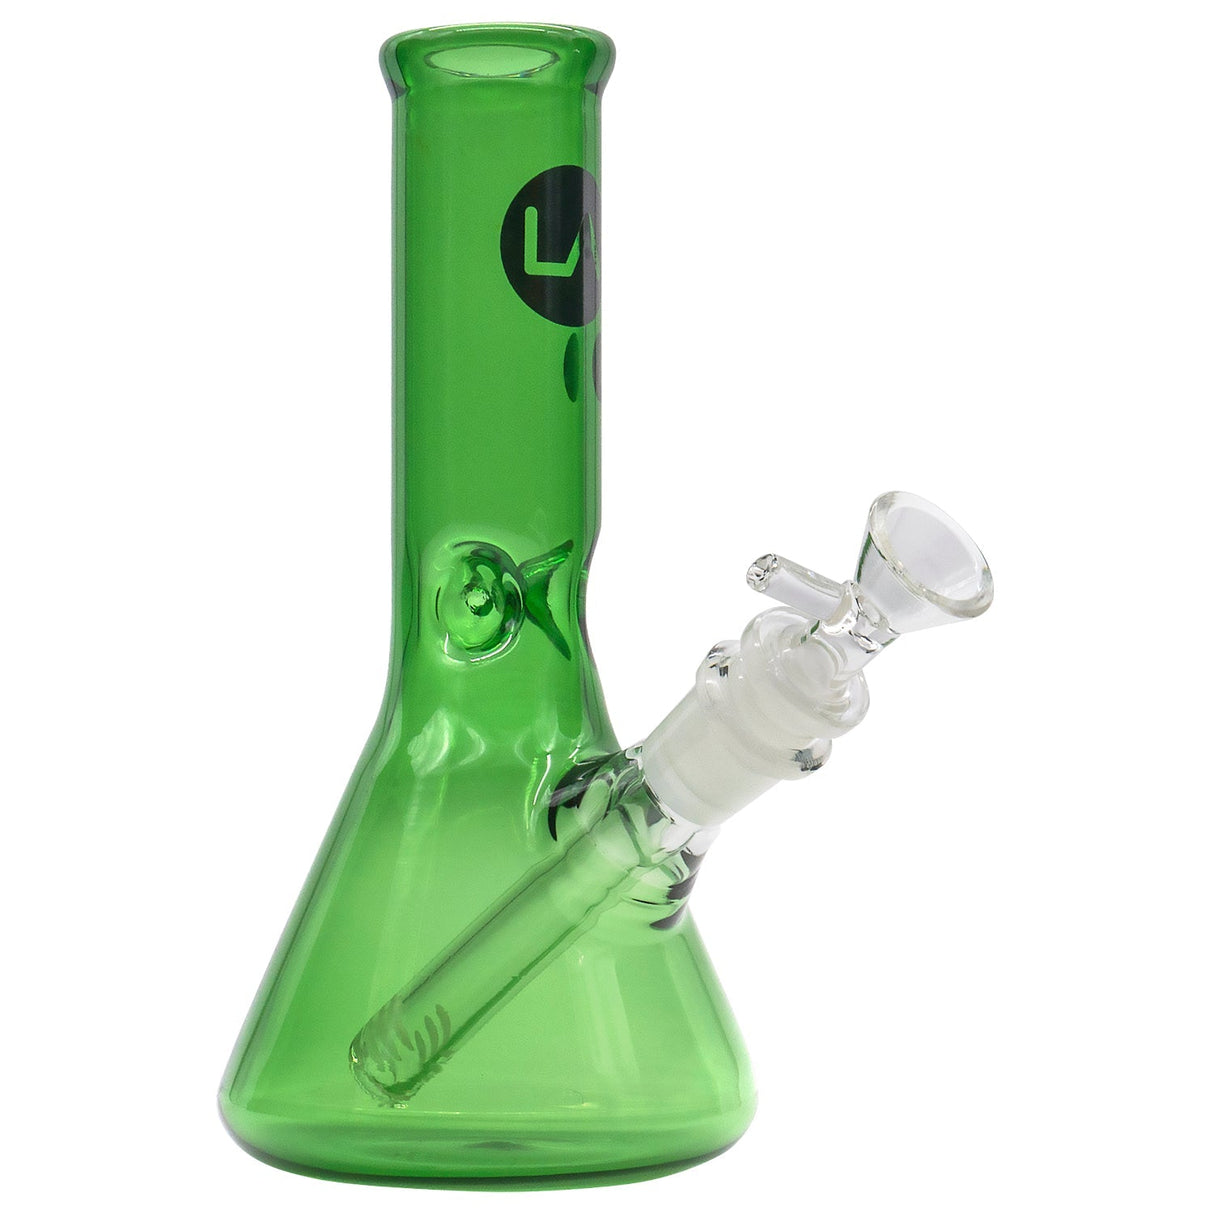 LA Pipes 8" Beaker Bong in Emerald Green with Glass on Glass Joint - Front View